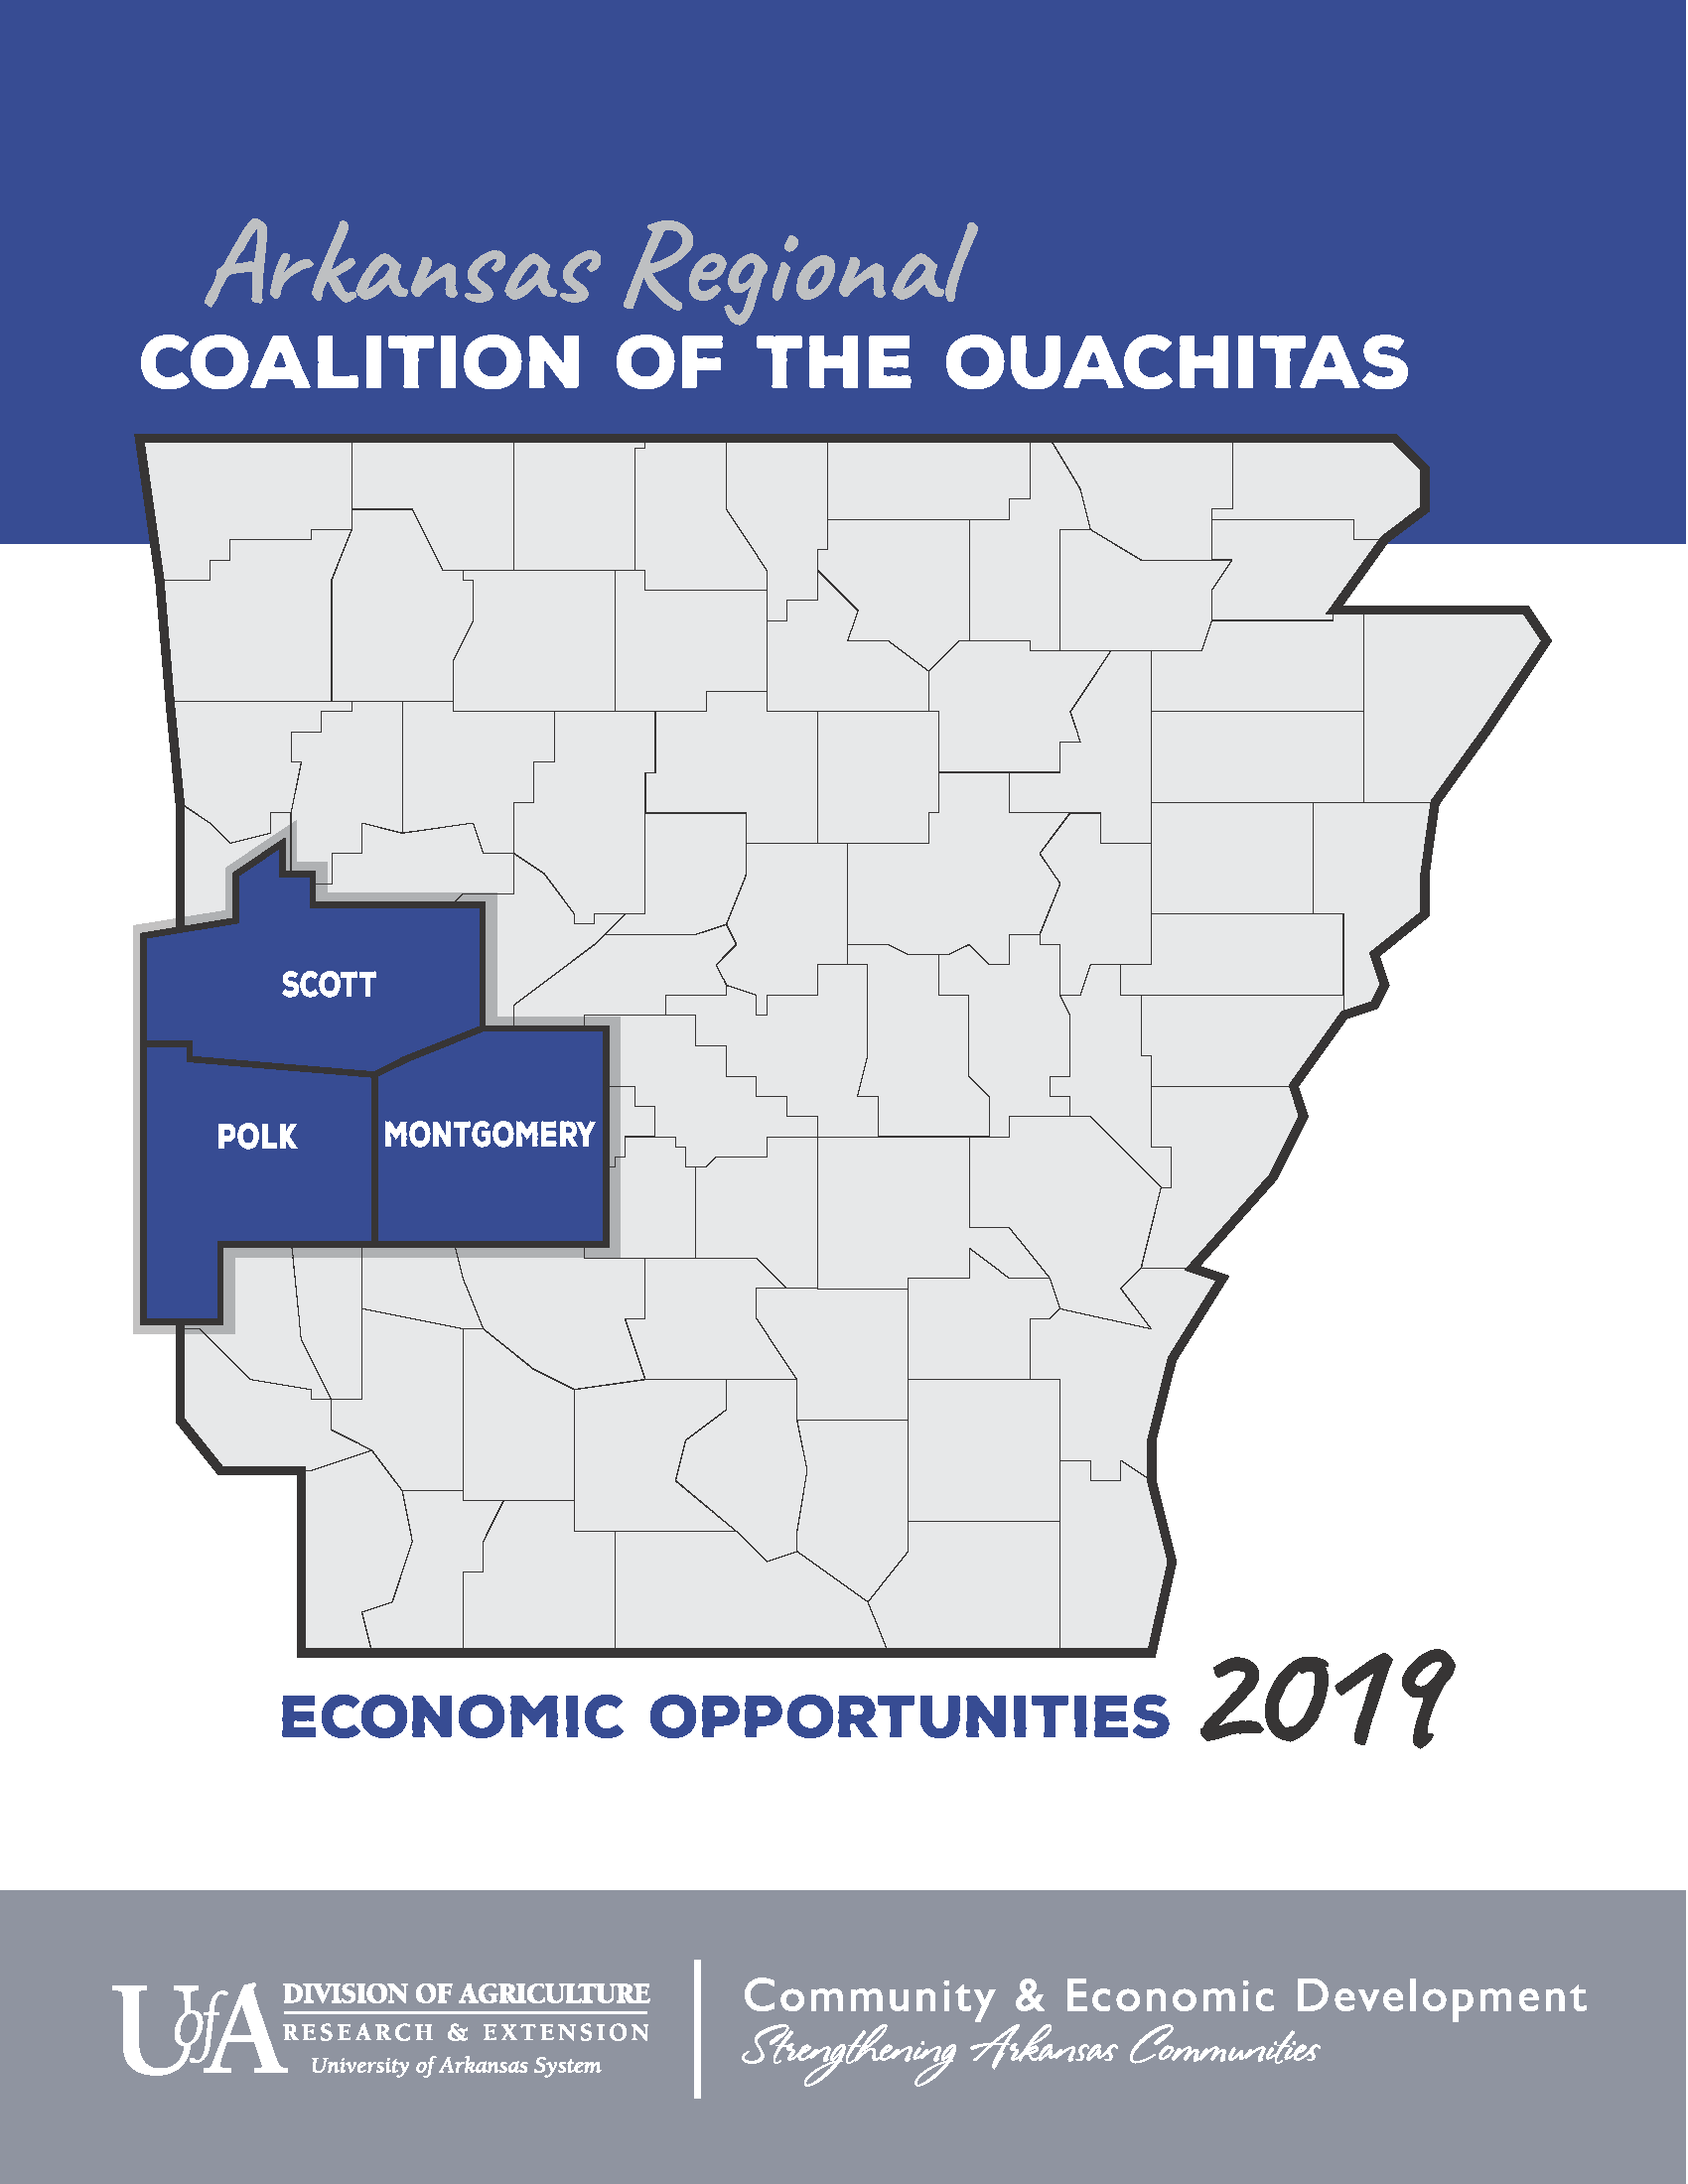 An image of the cover for the publication "ARCO Regional Opportunities 2019".  The cover art is a map of the state of Arkansas with Scott, Polk and Montgomery couties highlighted.